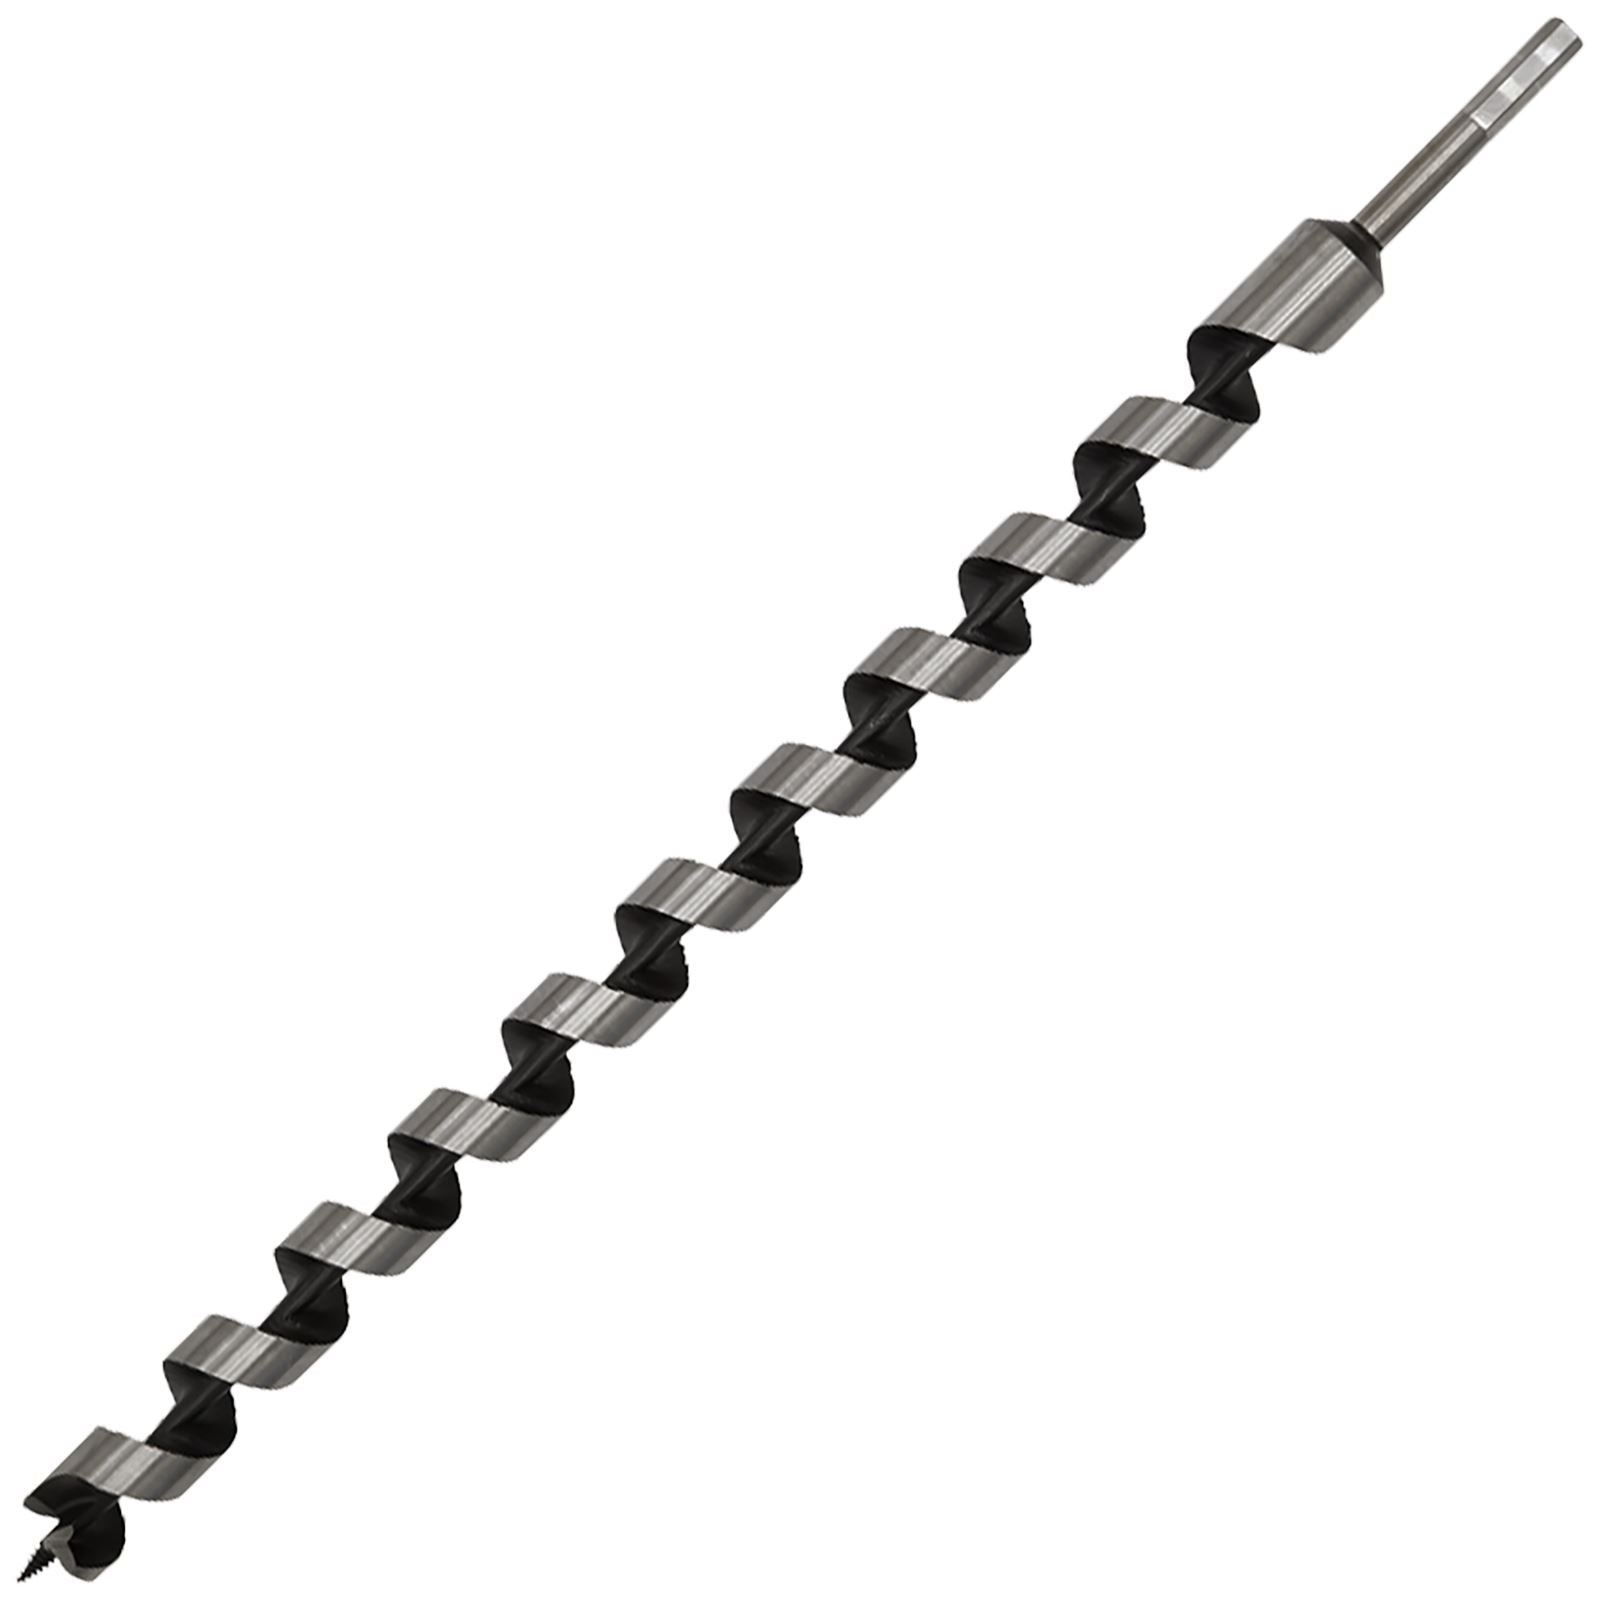 Worksafe by Sealey Auger Wood Drill Bit 30mm x 600mm